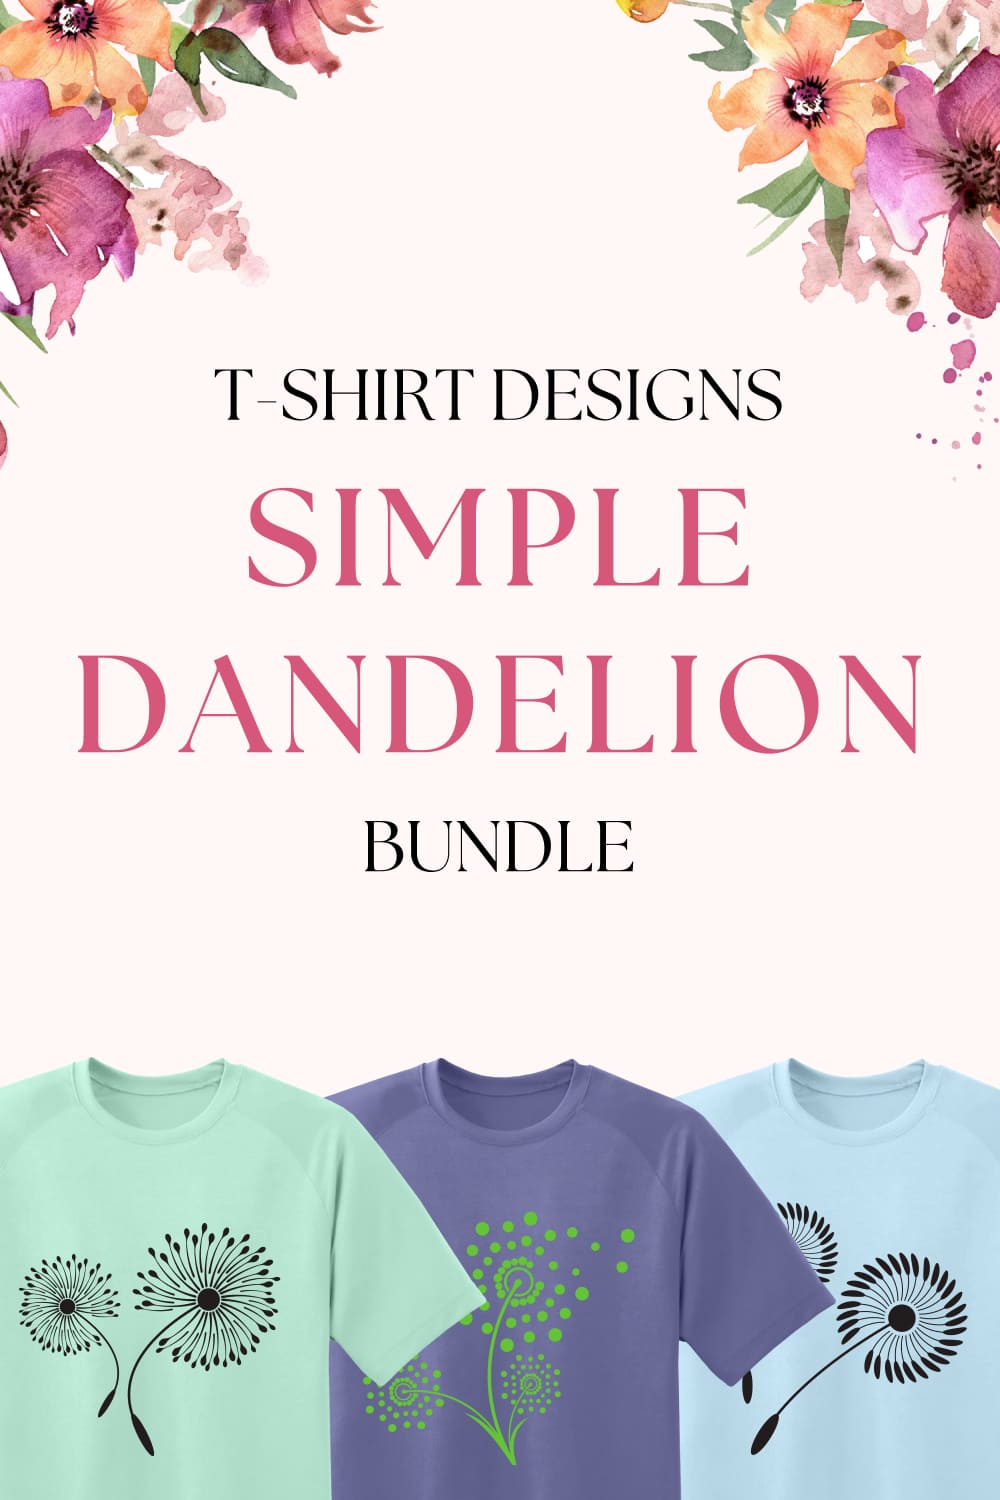 Collection from images of t-shirts with adorable dandelion prints.